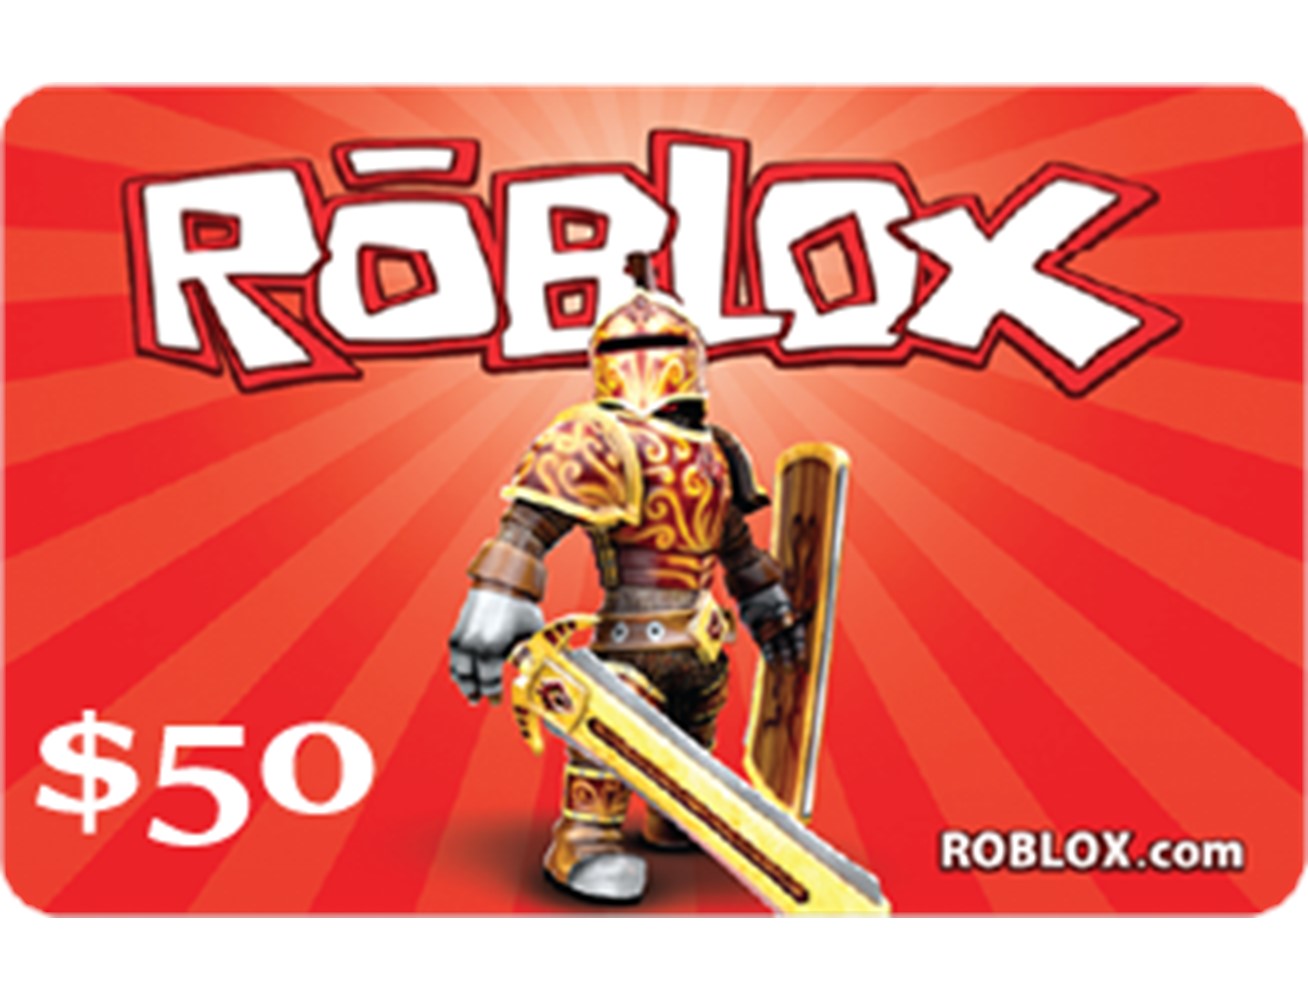 Roblox Gift Card $50